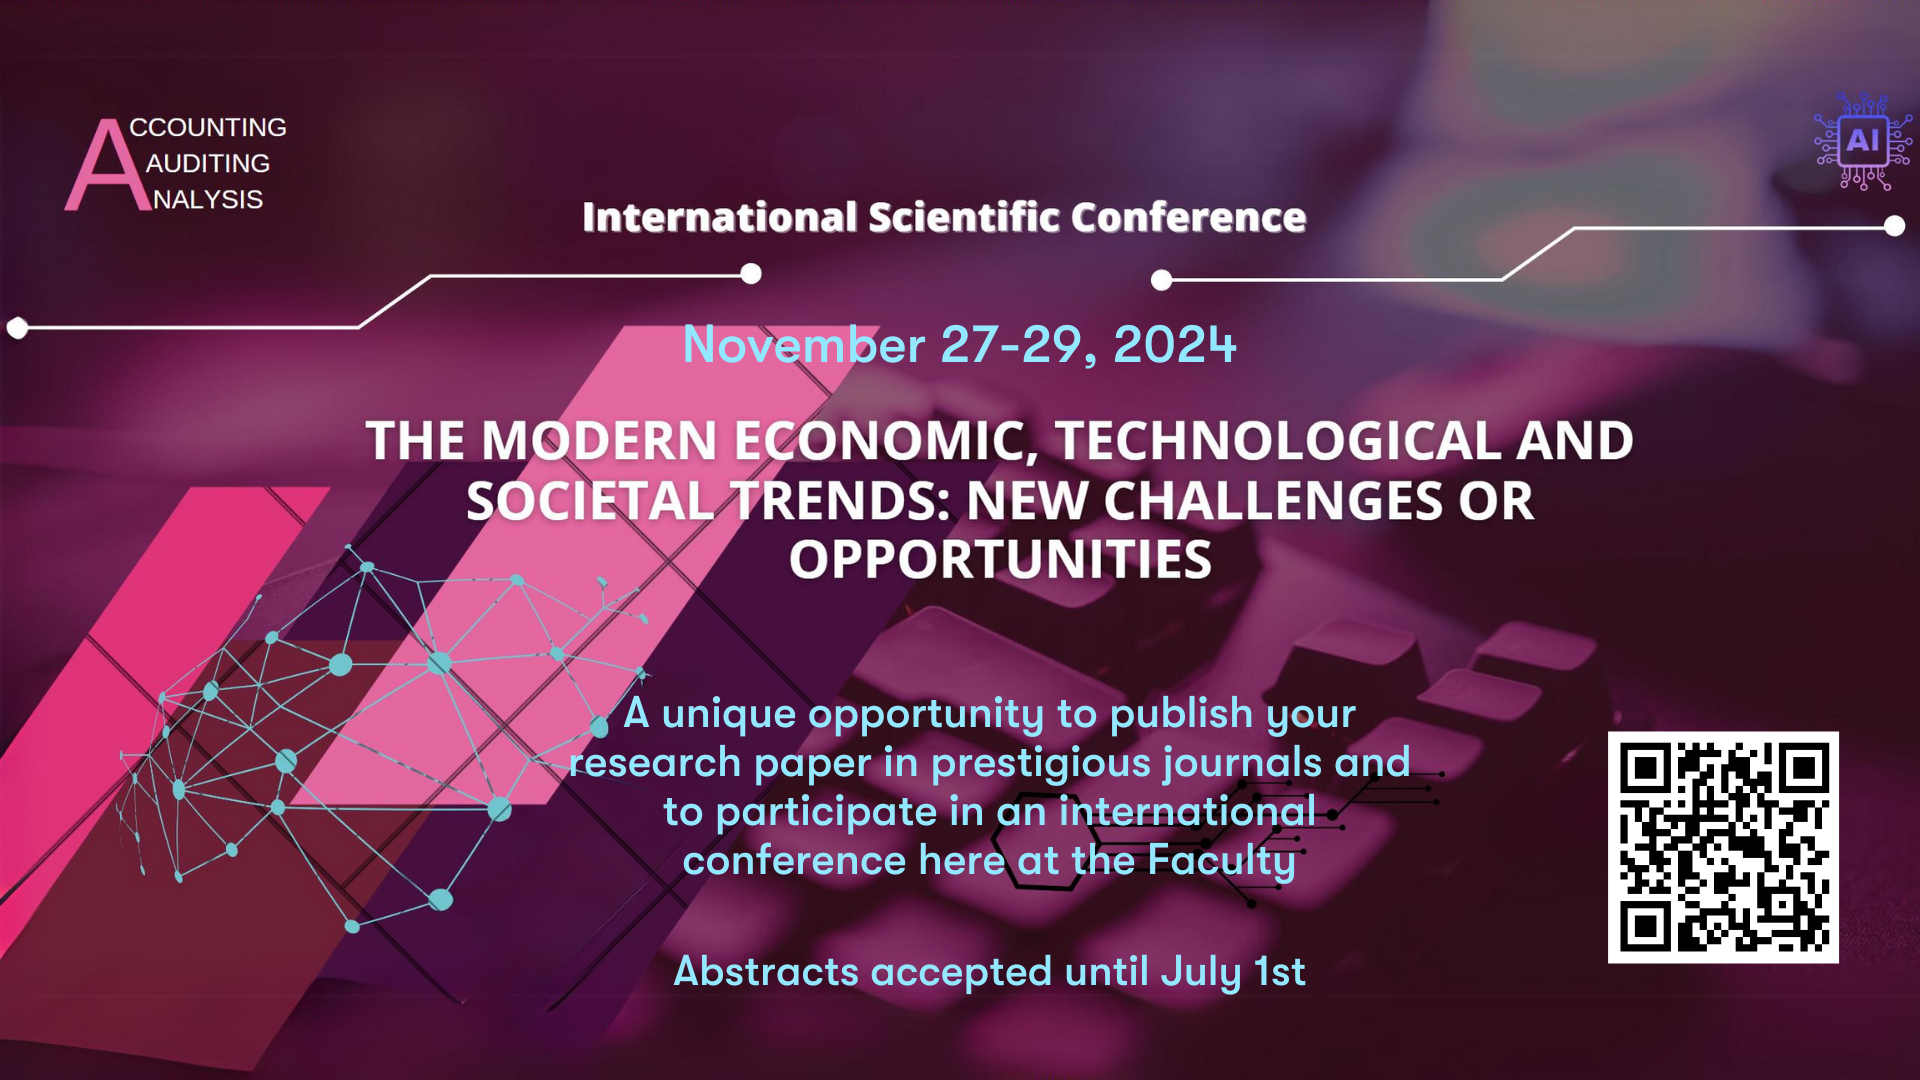 International Conference on Modern Economic Technological and Societal Trends visual